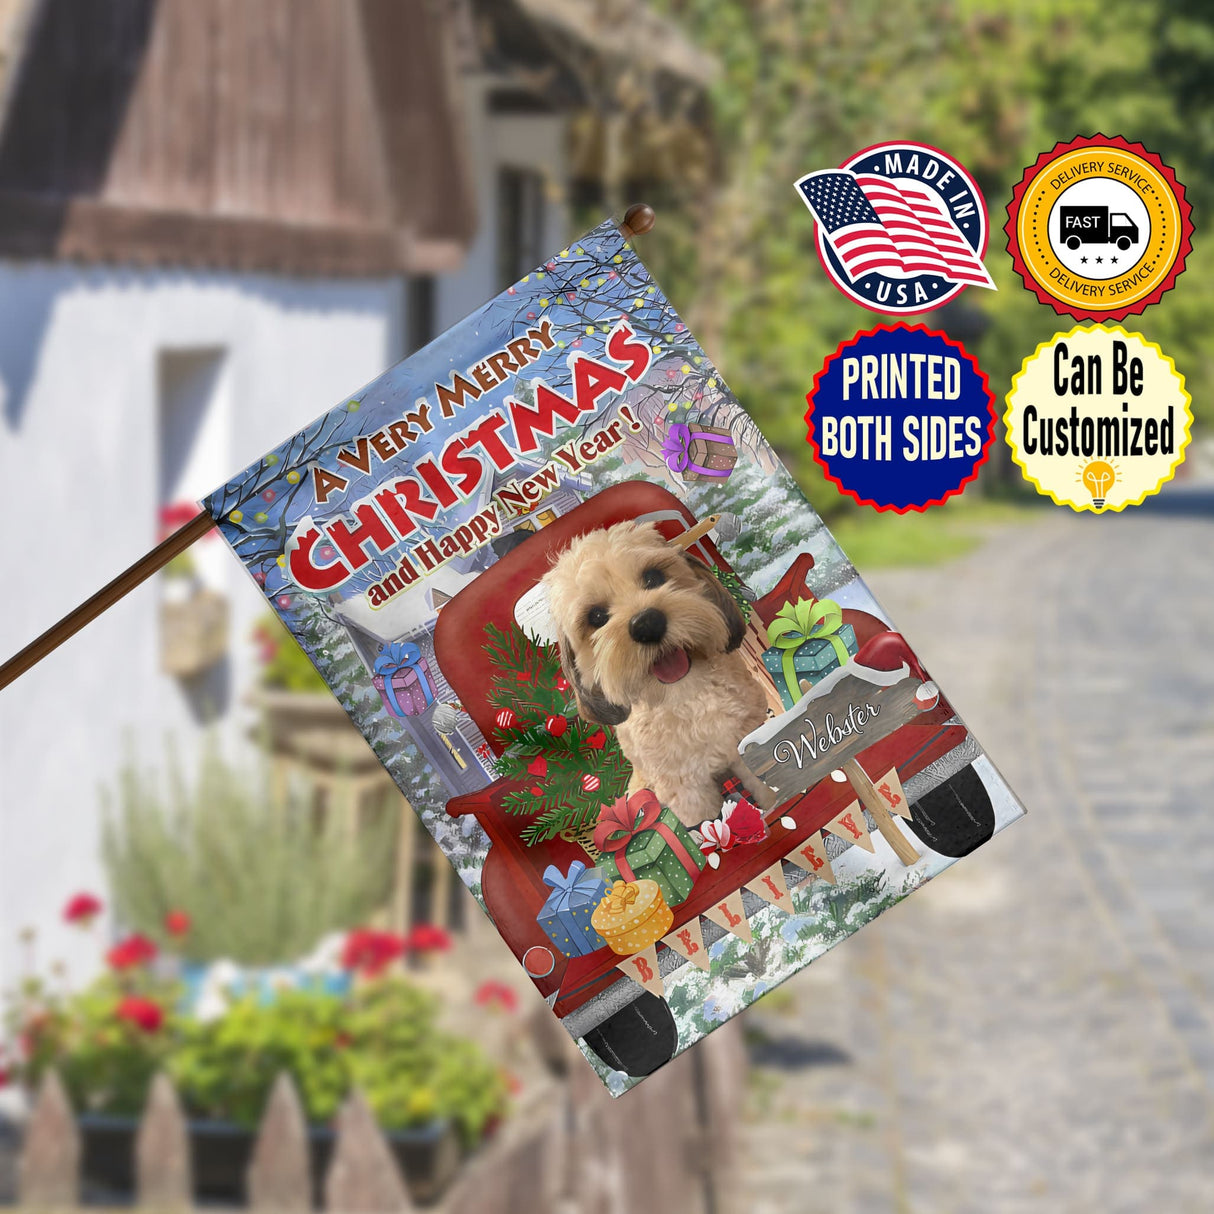 Yard Signs & Flags Dog Lovers - Personalized A Very Merry Christmas - Custom Photo & Name Pet Flag